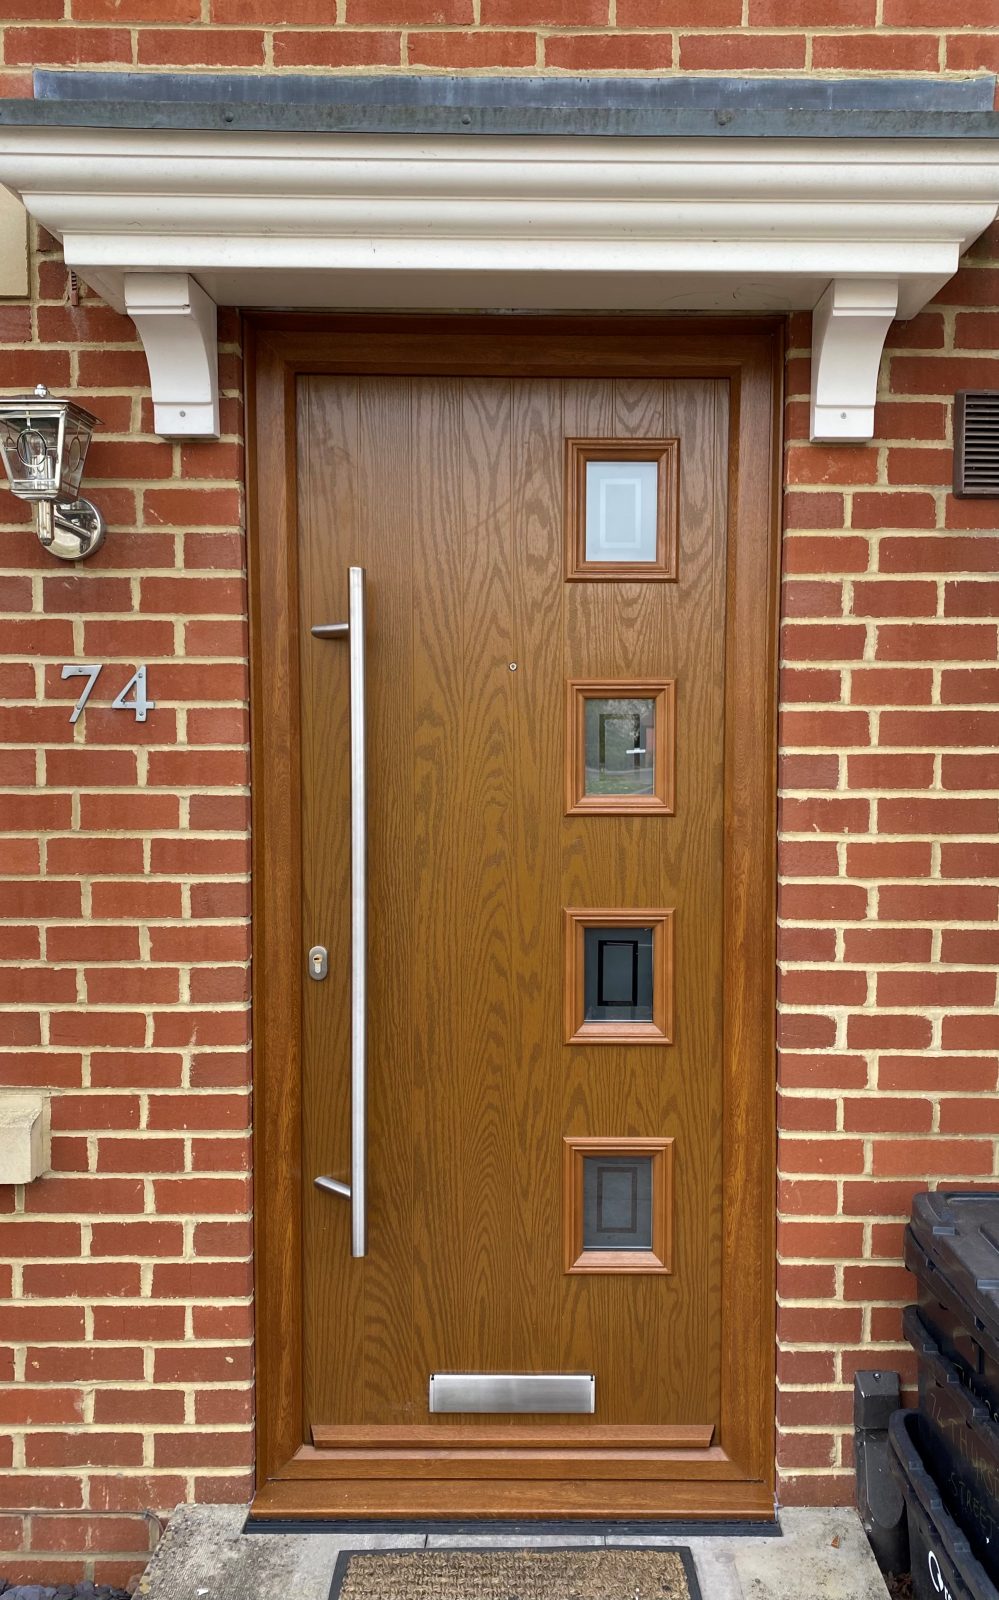 Timber effect door with small square windows.